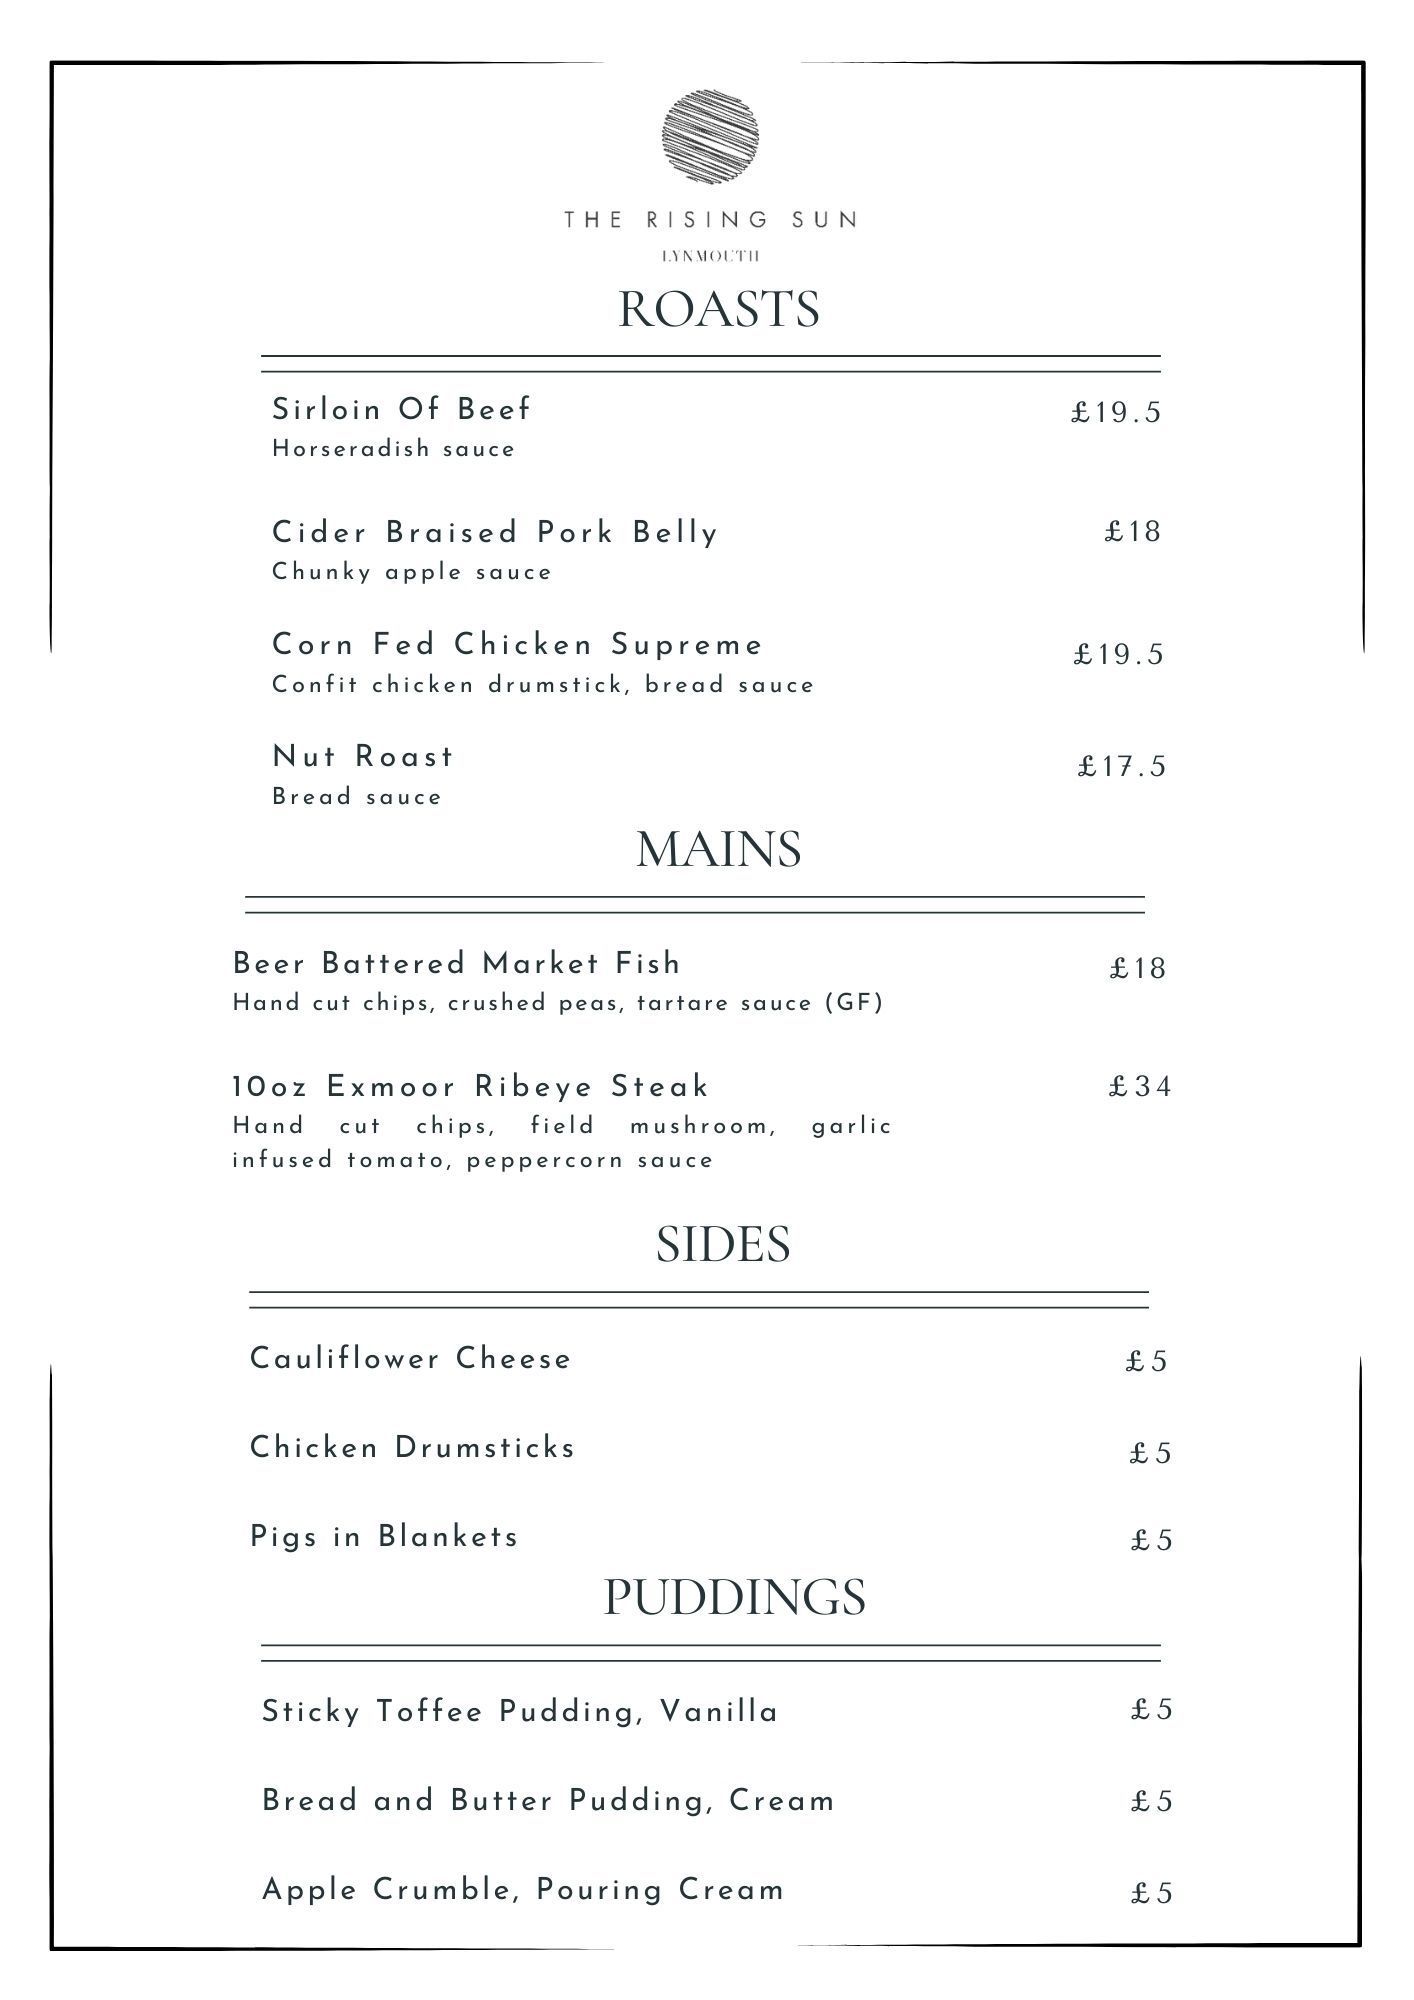 Roasts, mains, sides, and puddings for our Sunday menu at The Rising Sun Hotel.